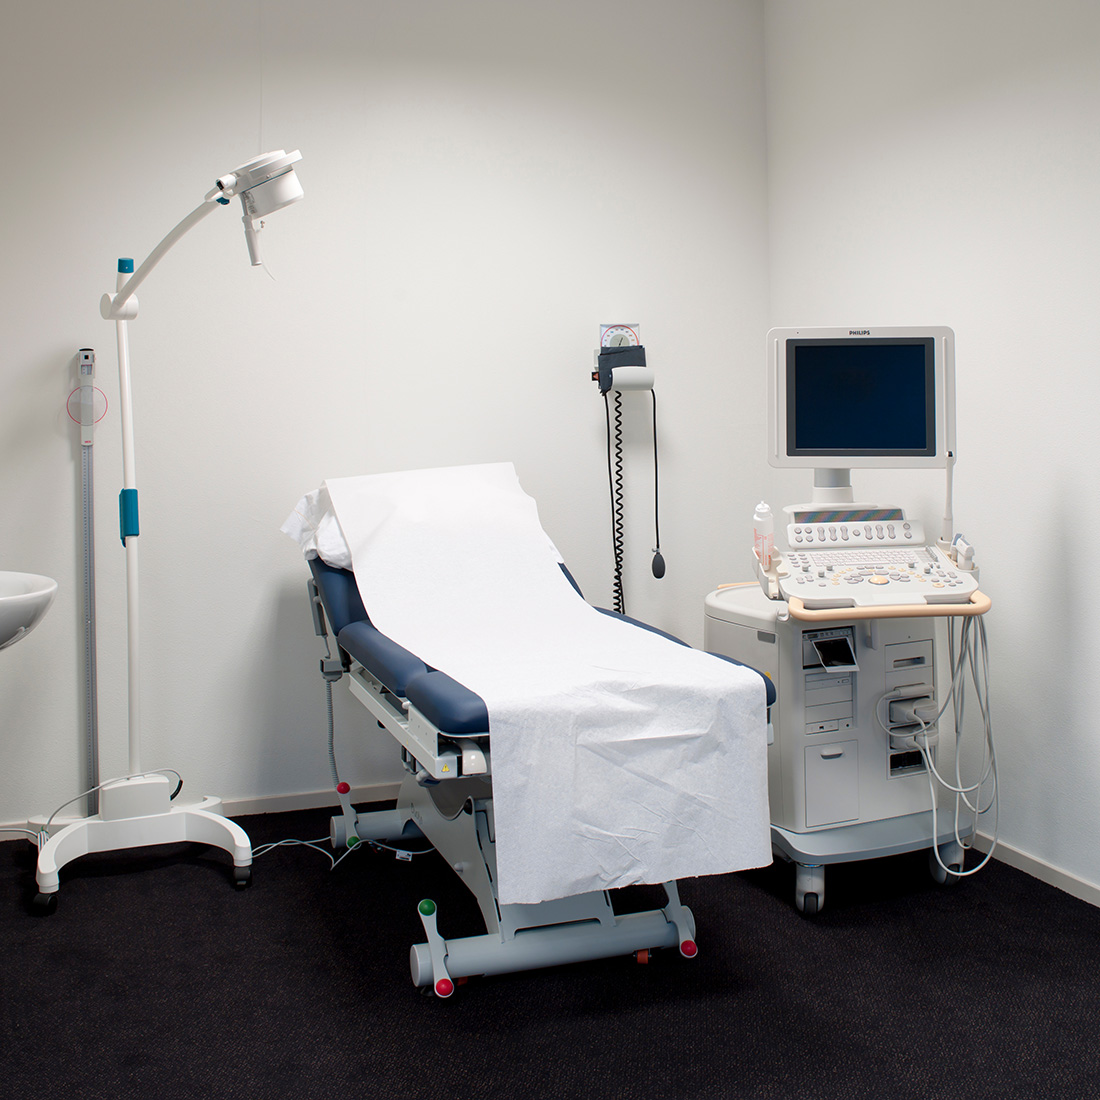 medical room with diagnostic equipment